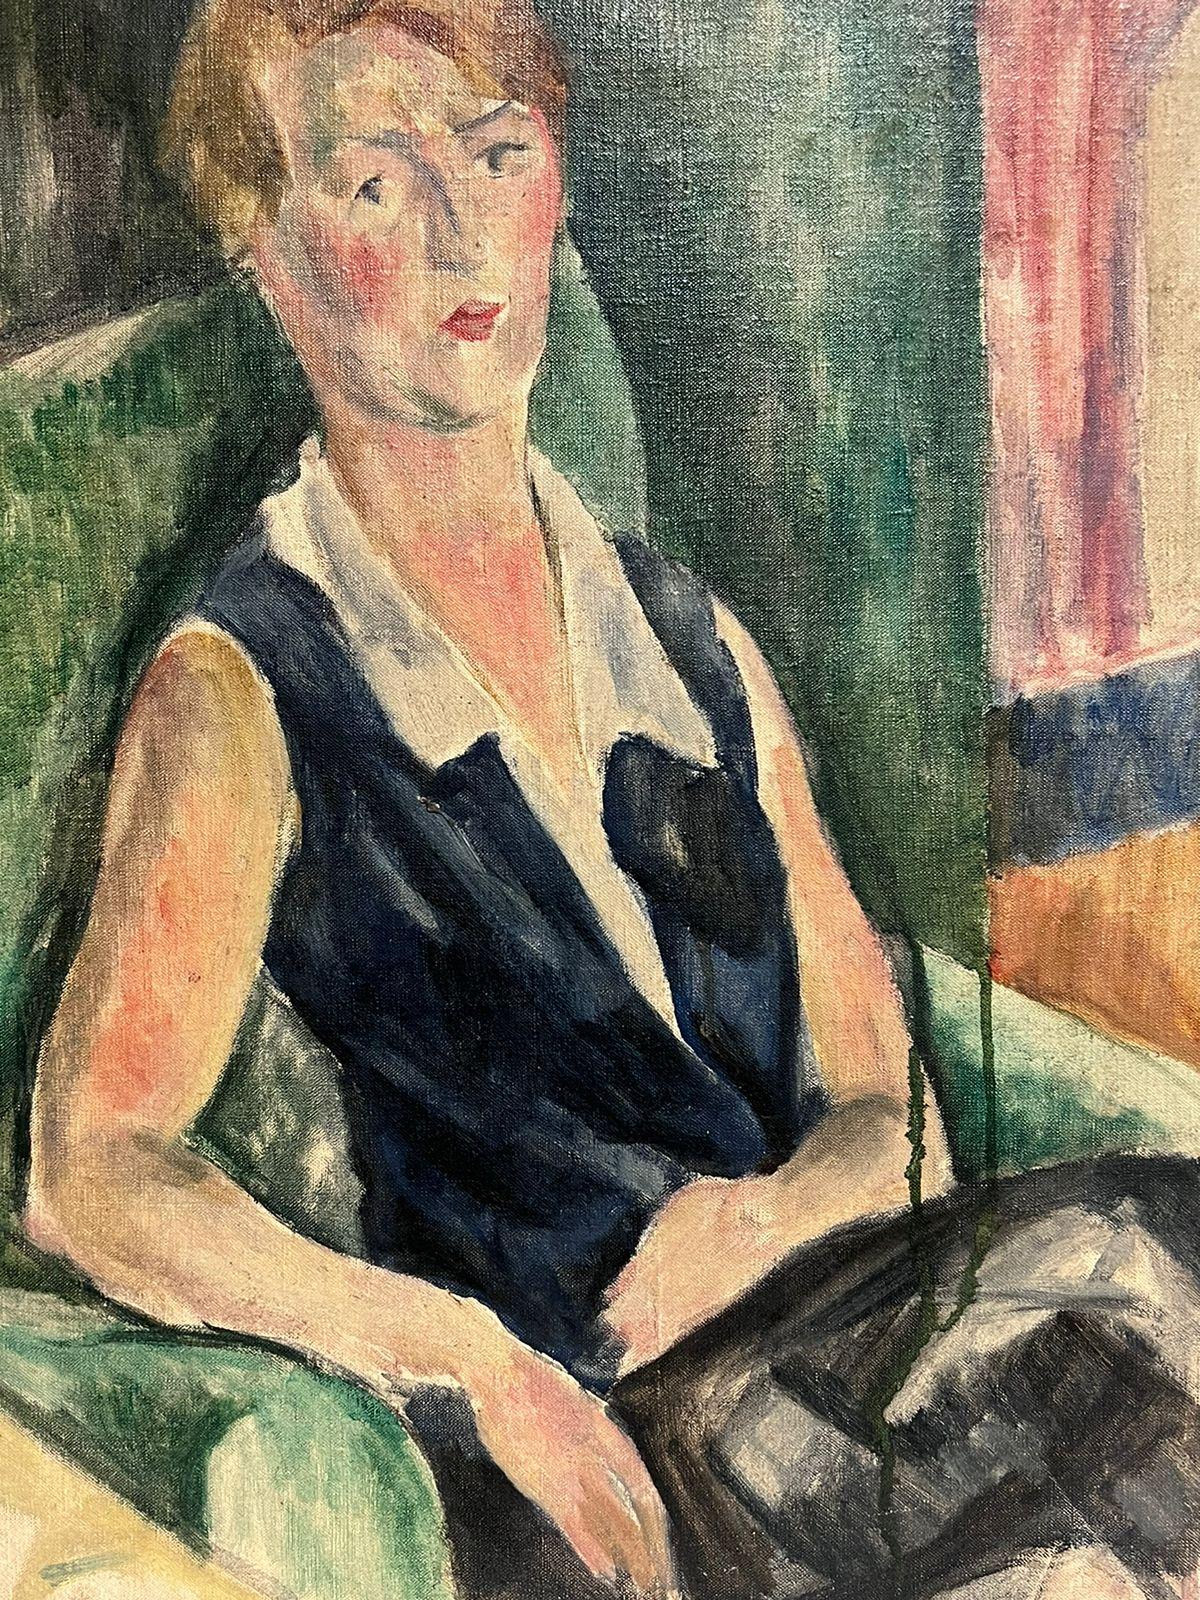 Portrait of a Lady in a Chair
French Post-Impressionist artist, circa 1900
oil painting on canvas, unframed
canvas: 24 x 20 inches
provenance: private collection, France
condition: very good and sound condition